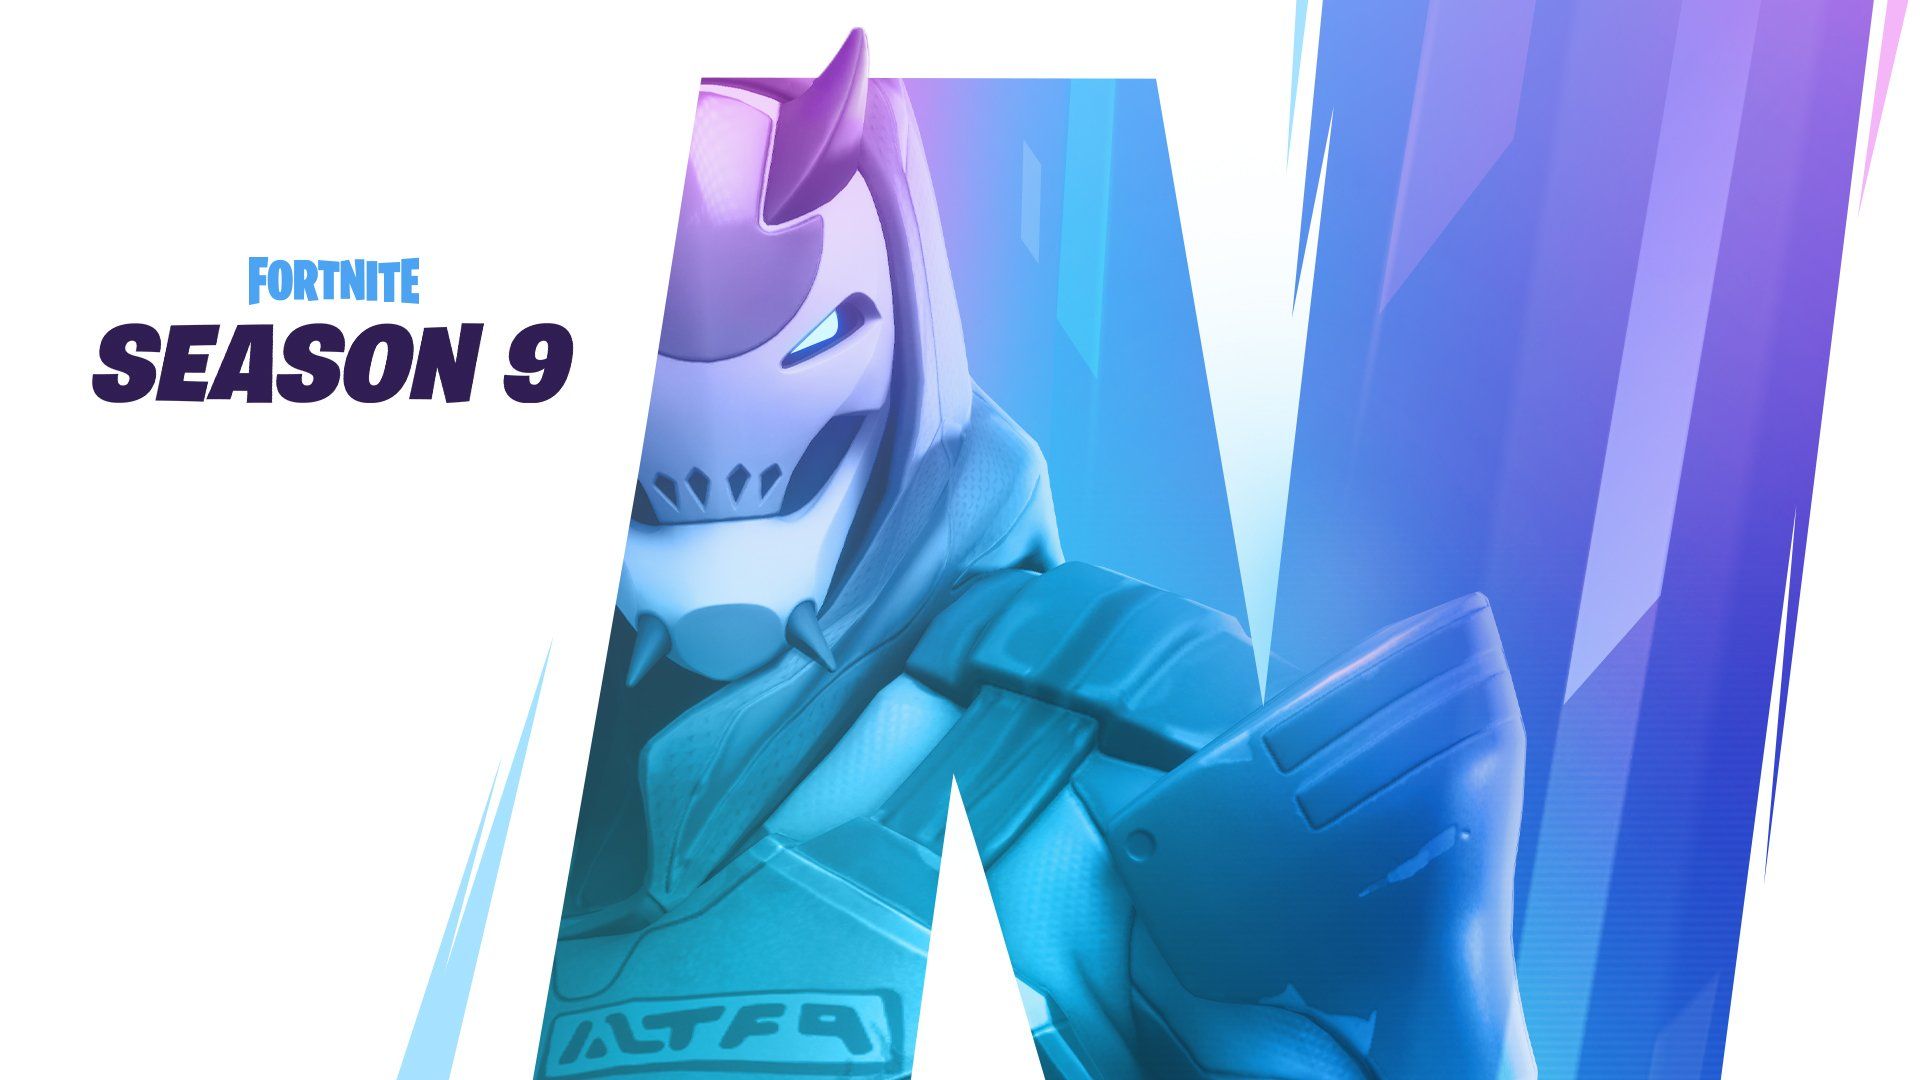 What NEO could mean in Fortnite season 9 teasers